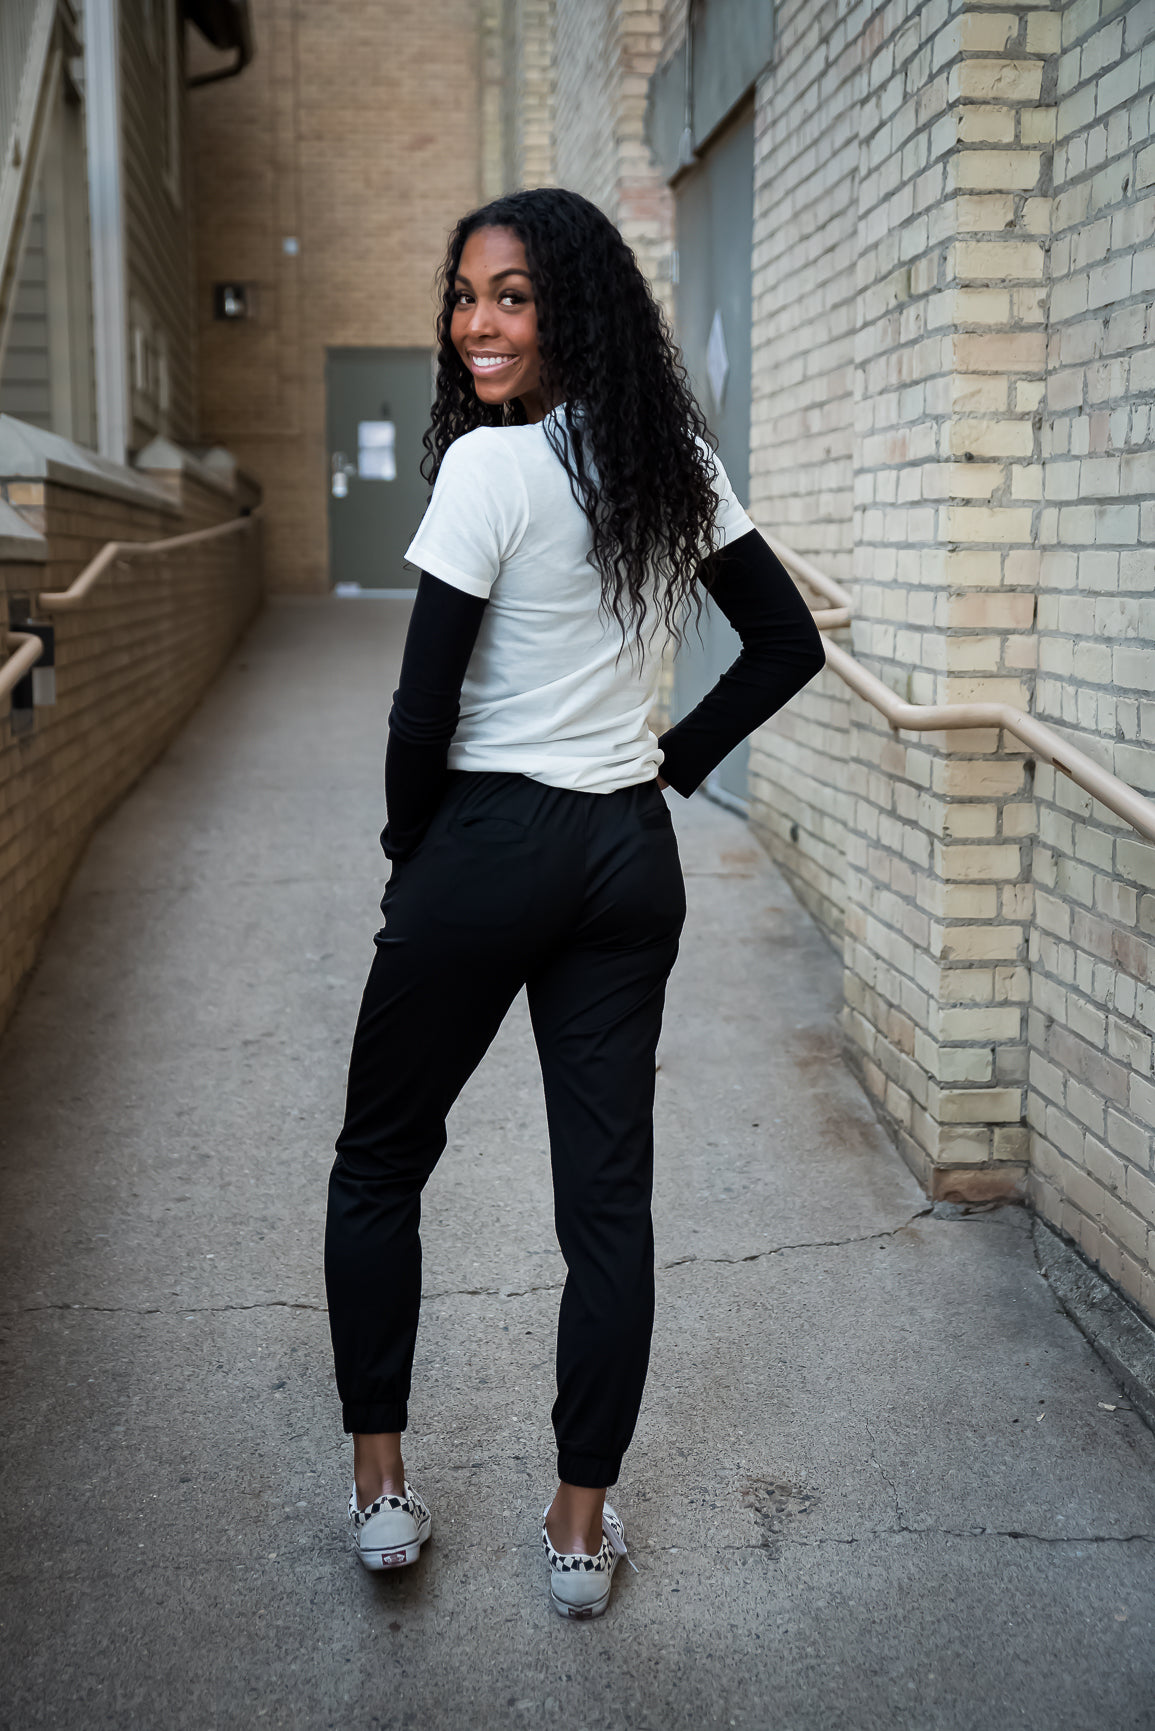 Black Sweatpants Outfits: What to Wear With Black Sweatpants